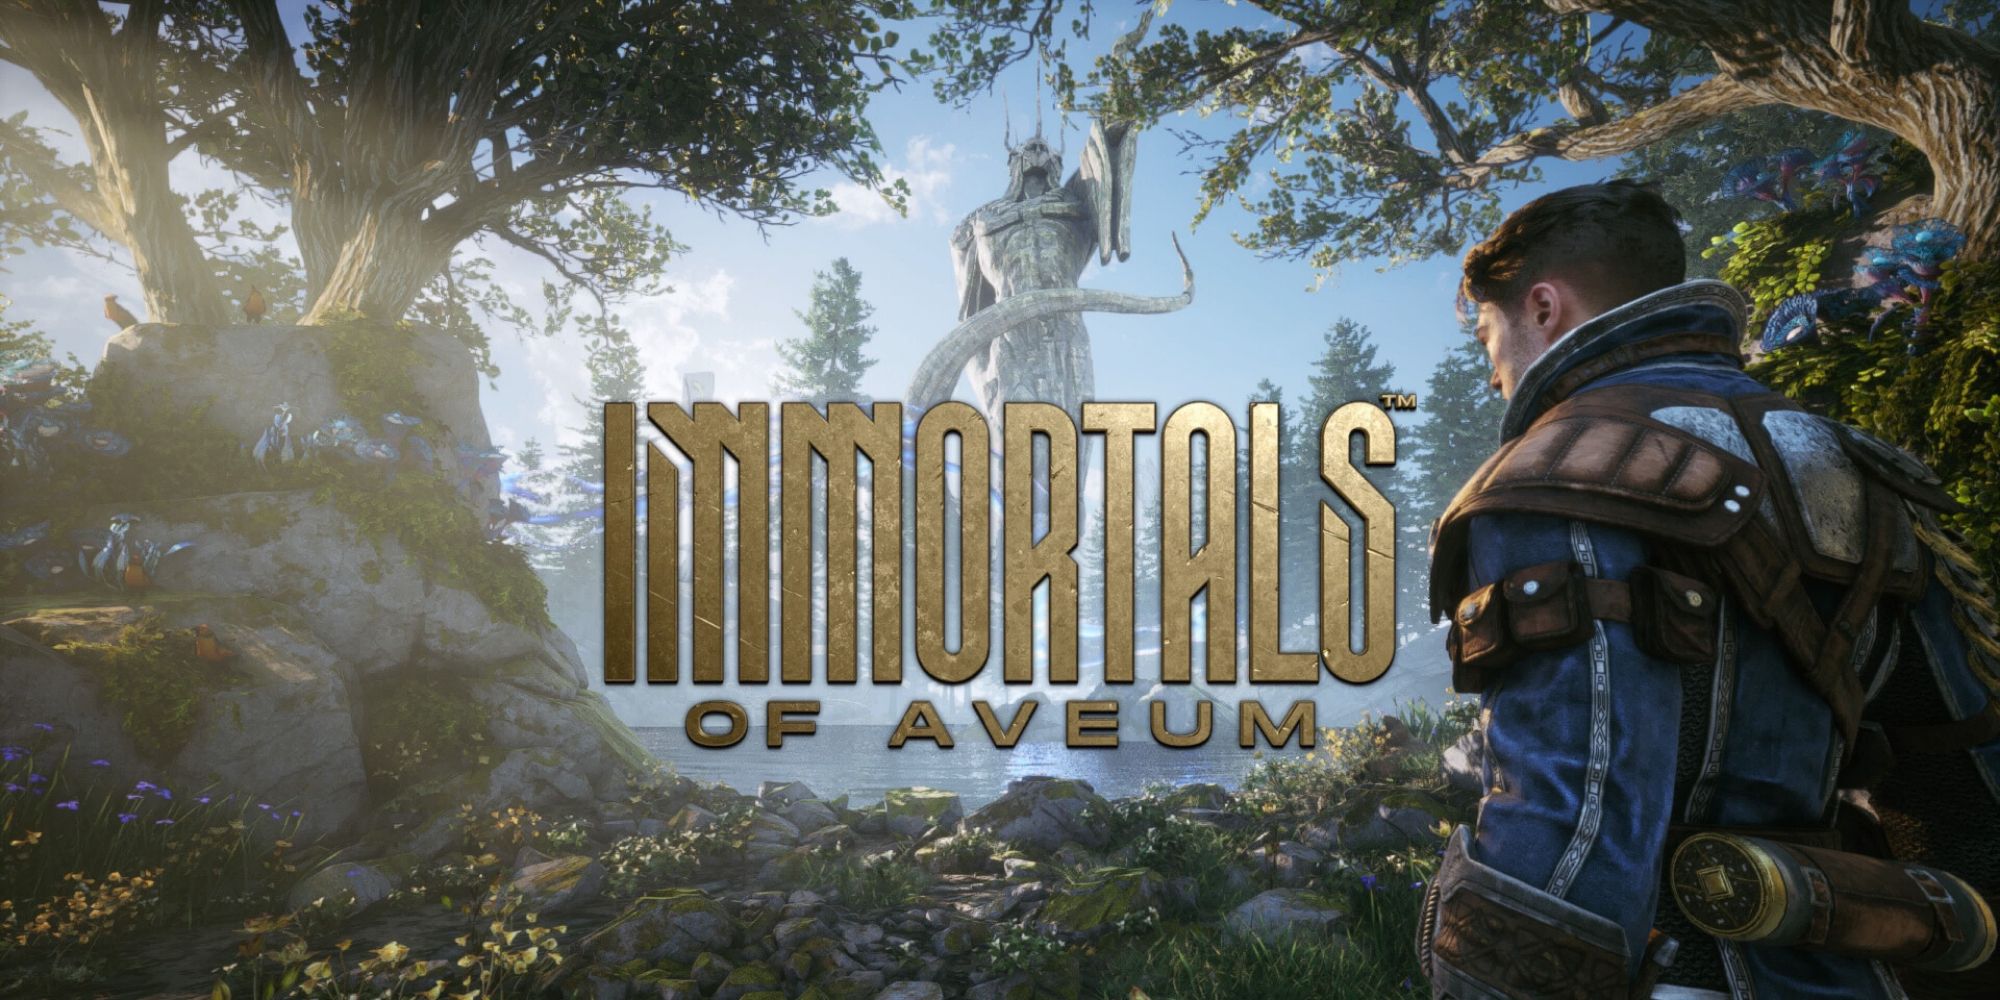 The main menu image from Immortals of Aveum showing Jak and the Pentacade statue